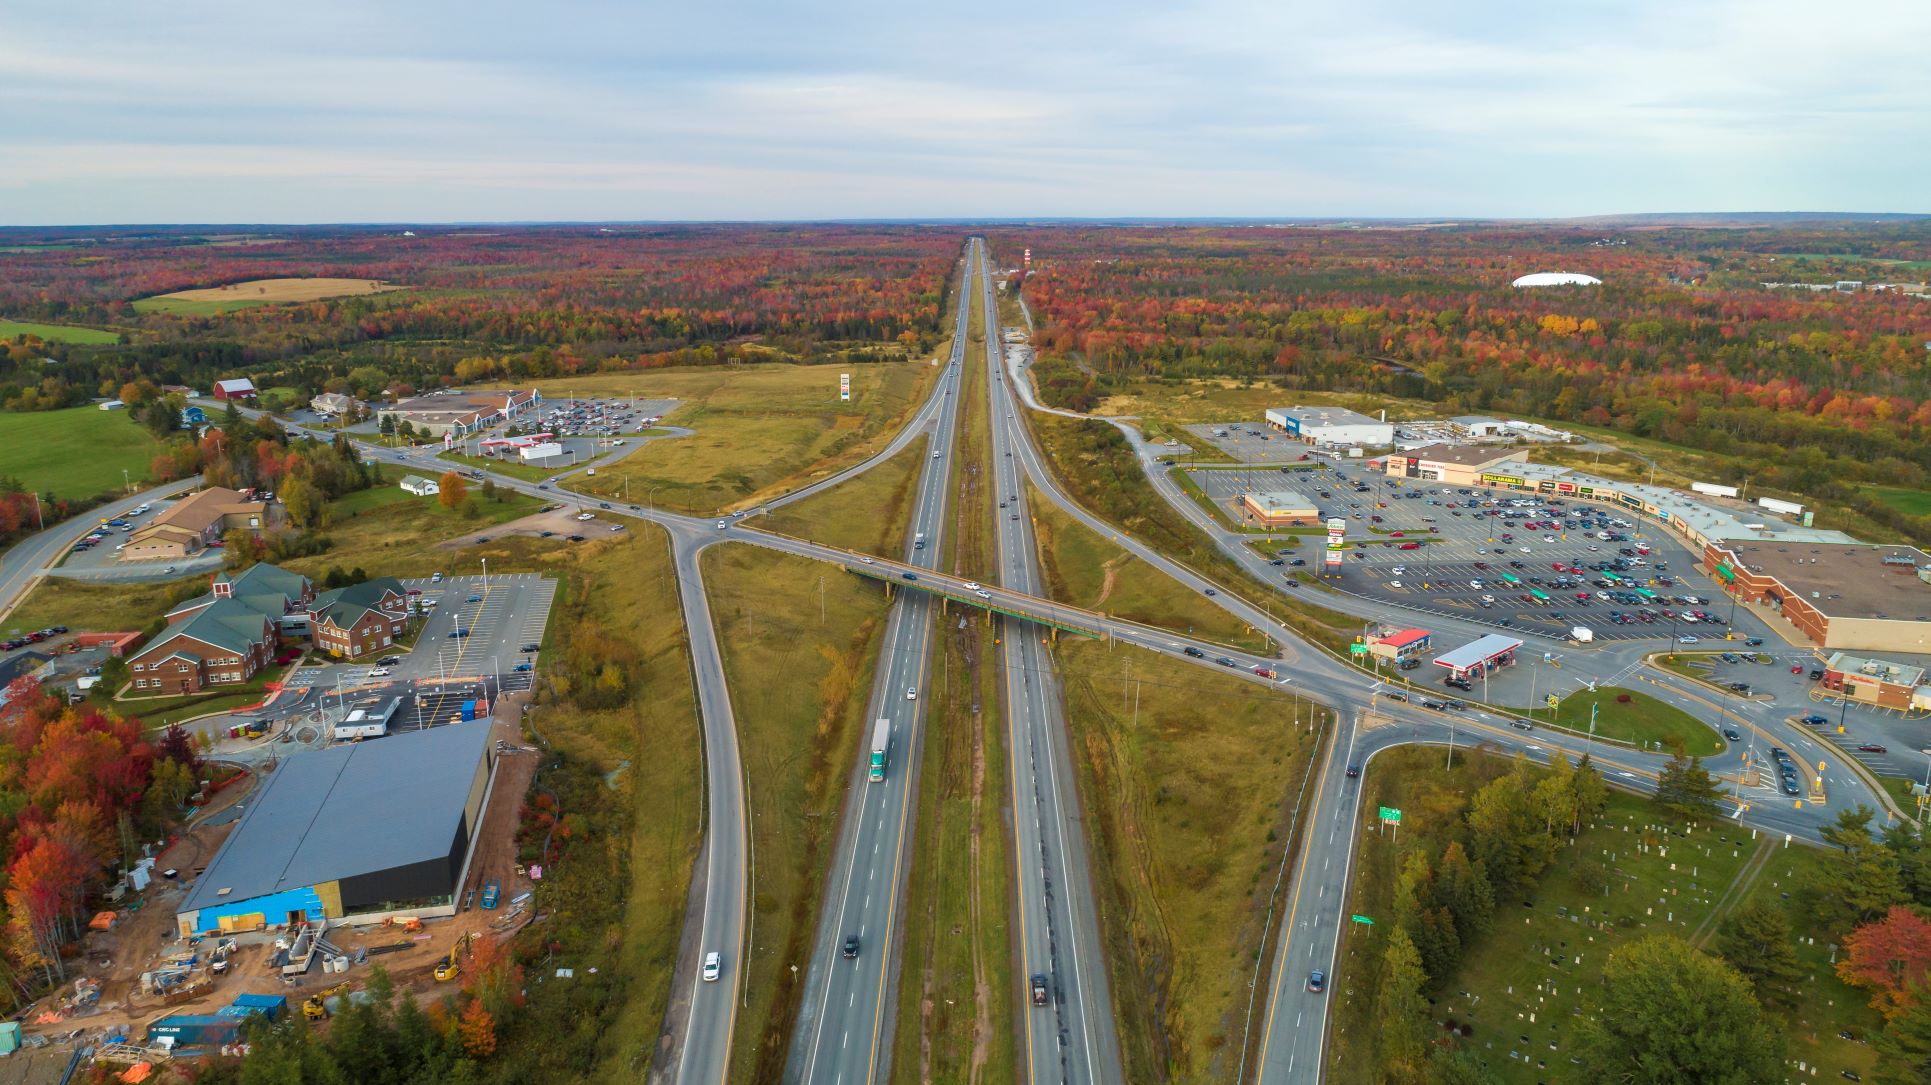 Aerial view of Highway 102 with fall foliage